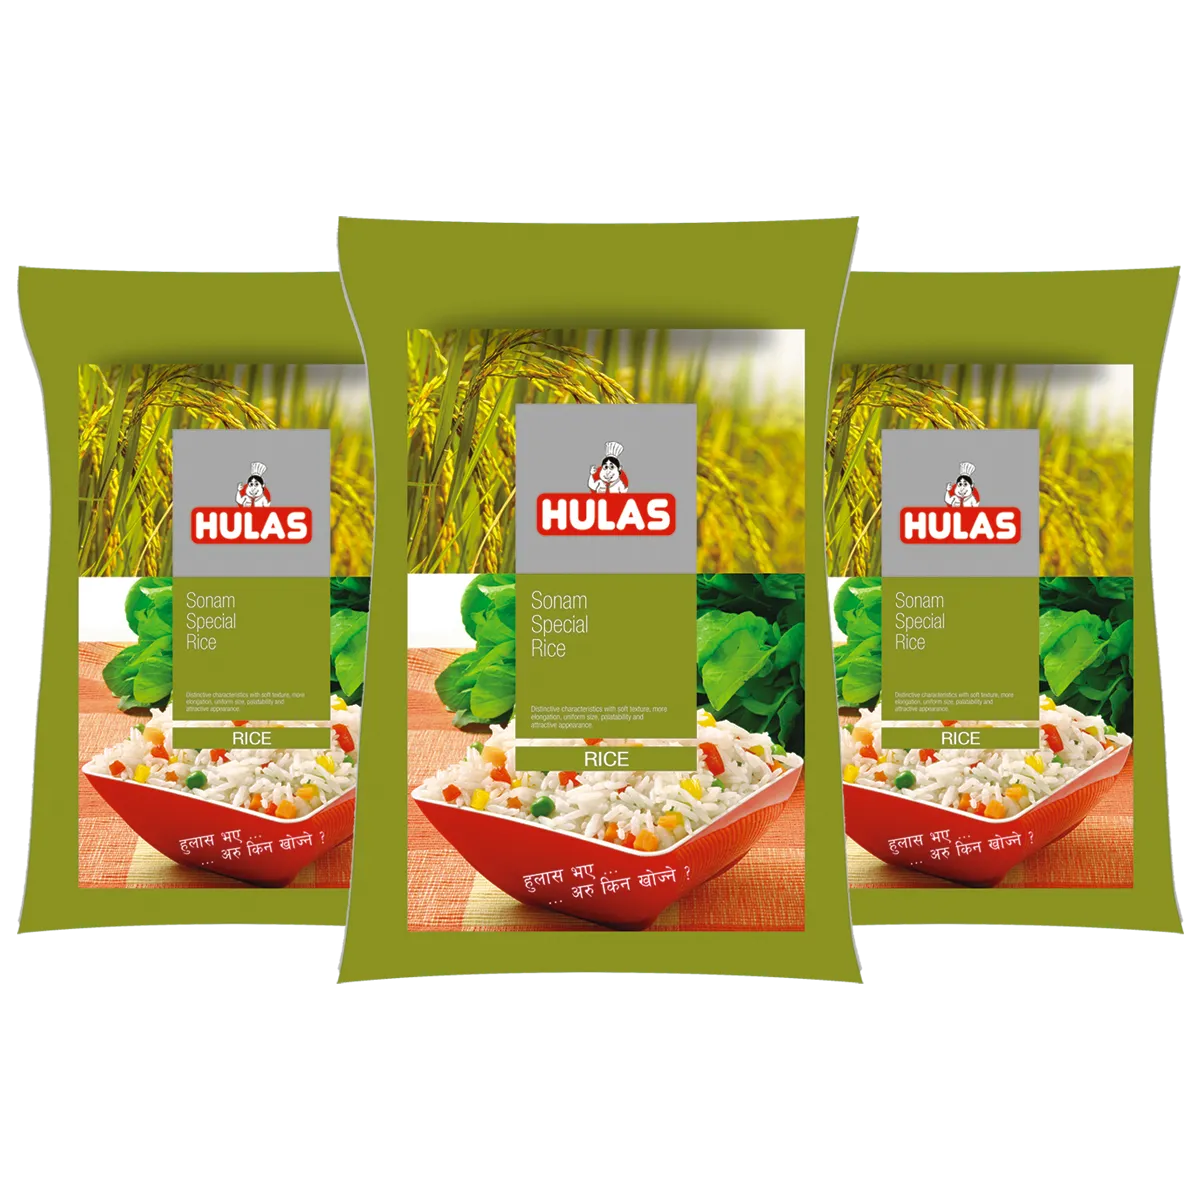 Hulas Sonam Special Rice 5 and 25 kg